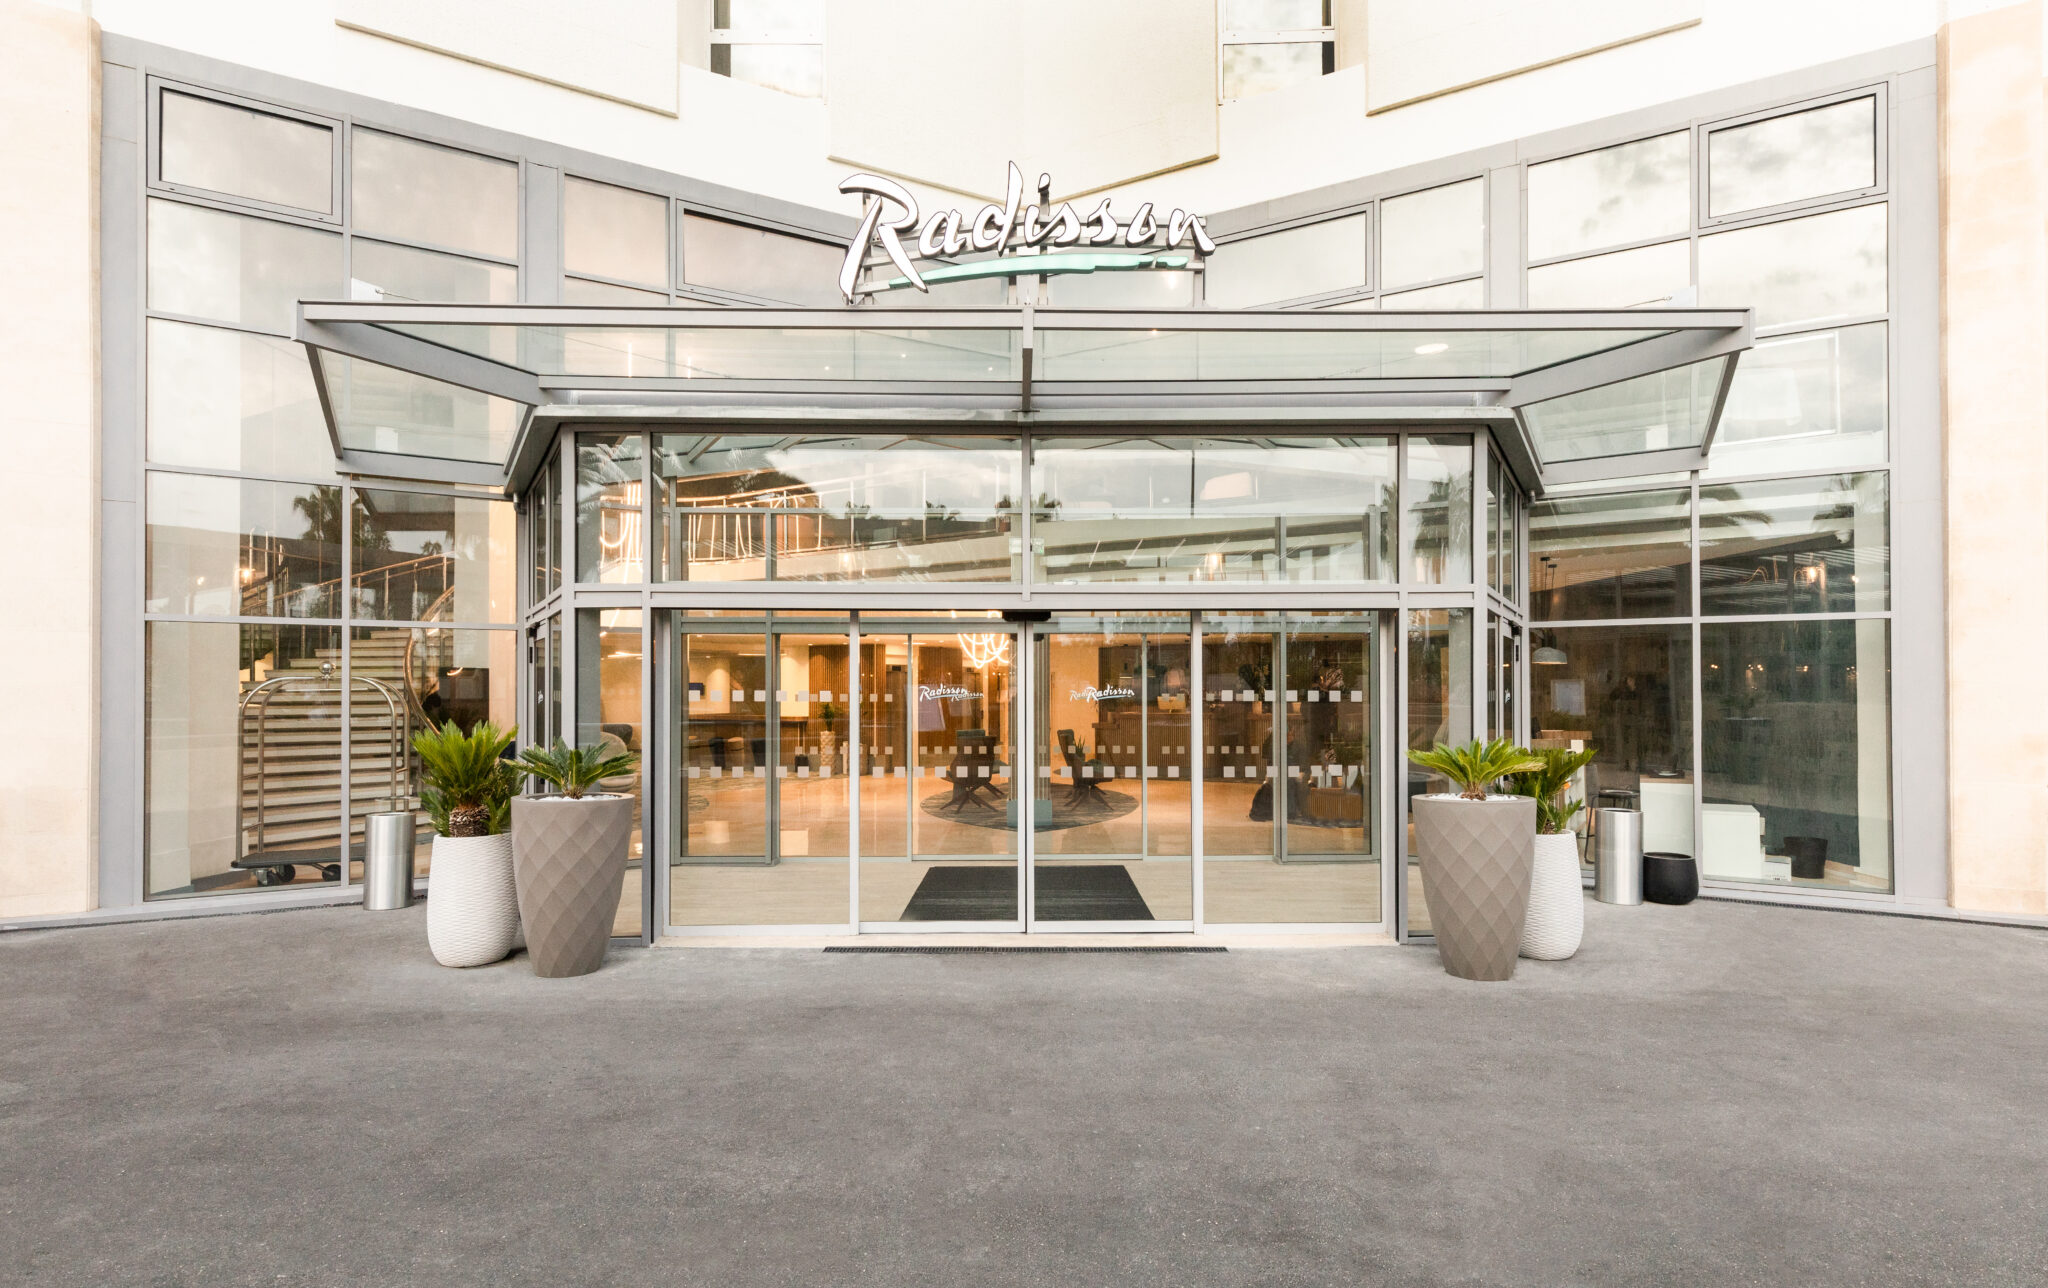 Radisson Hotel Group opens first Radisson hotel in France